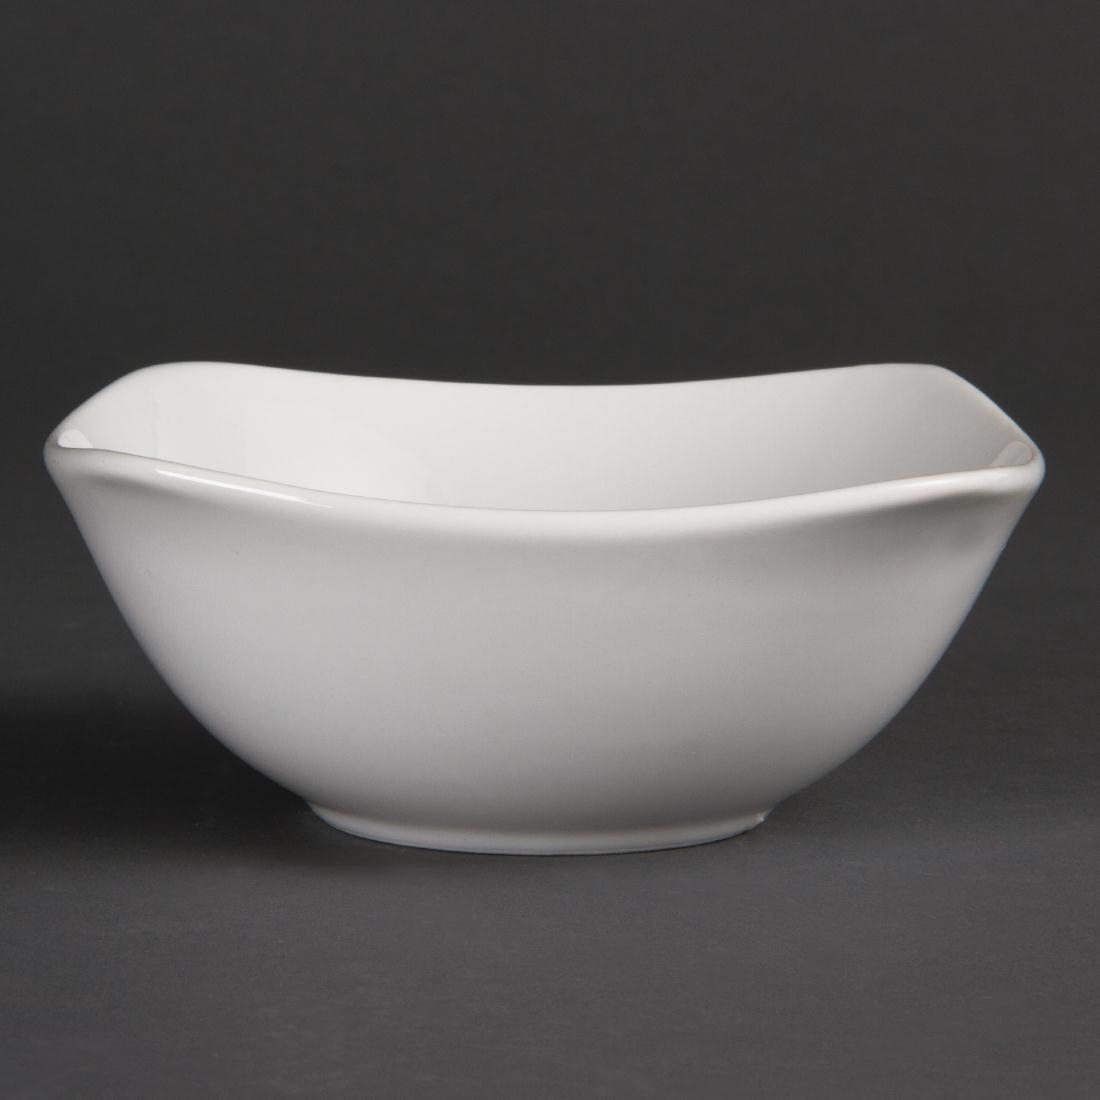 Olympia Whiteware Rounded Square Bowls 140mm